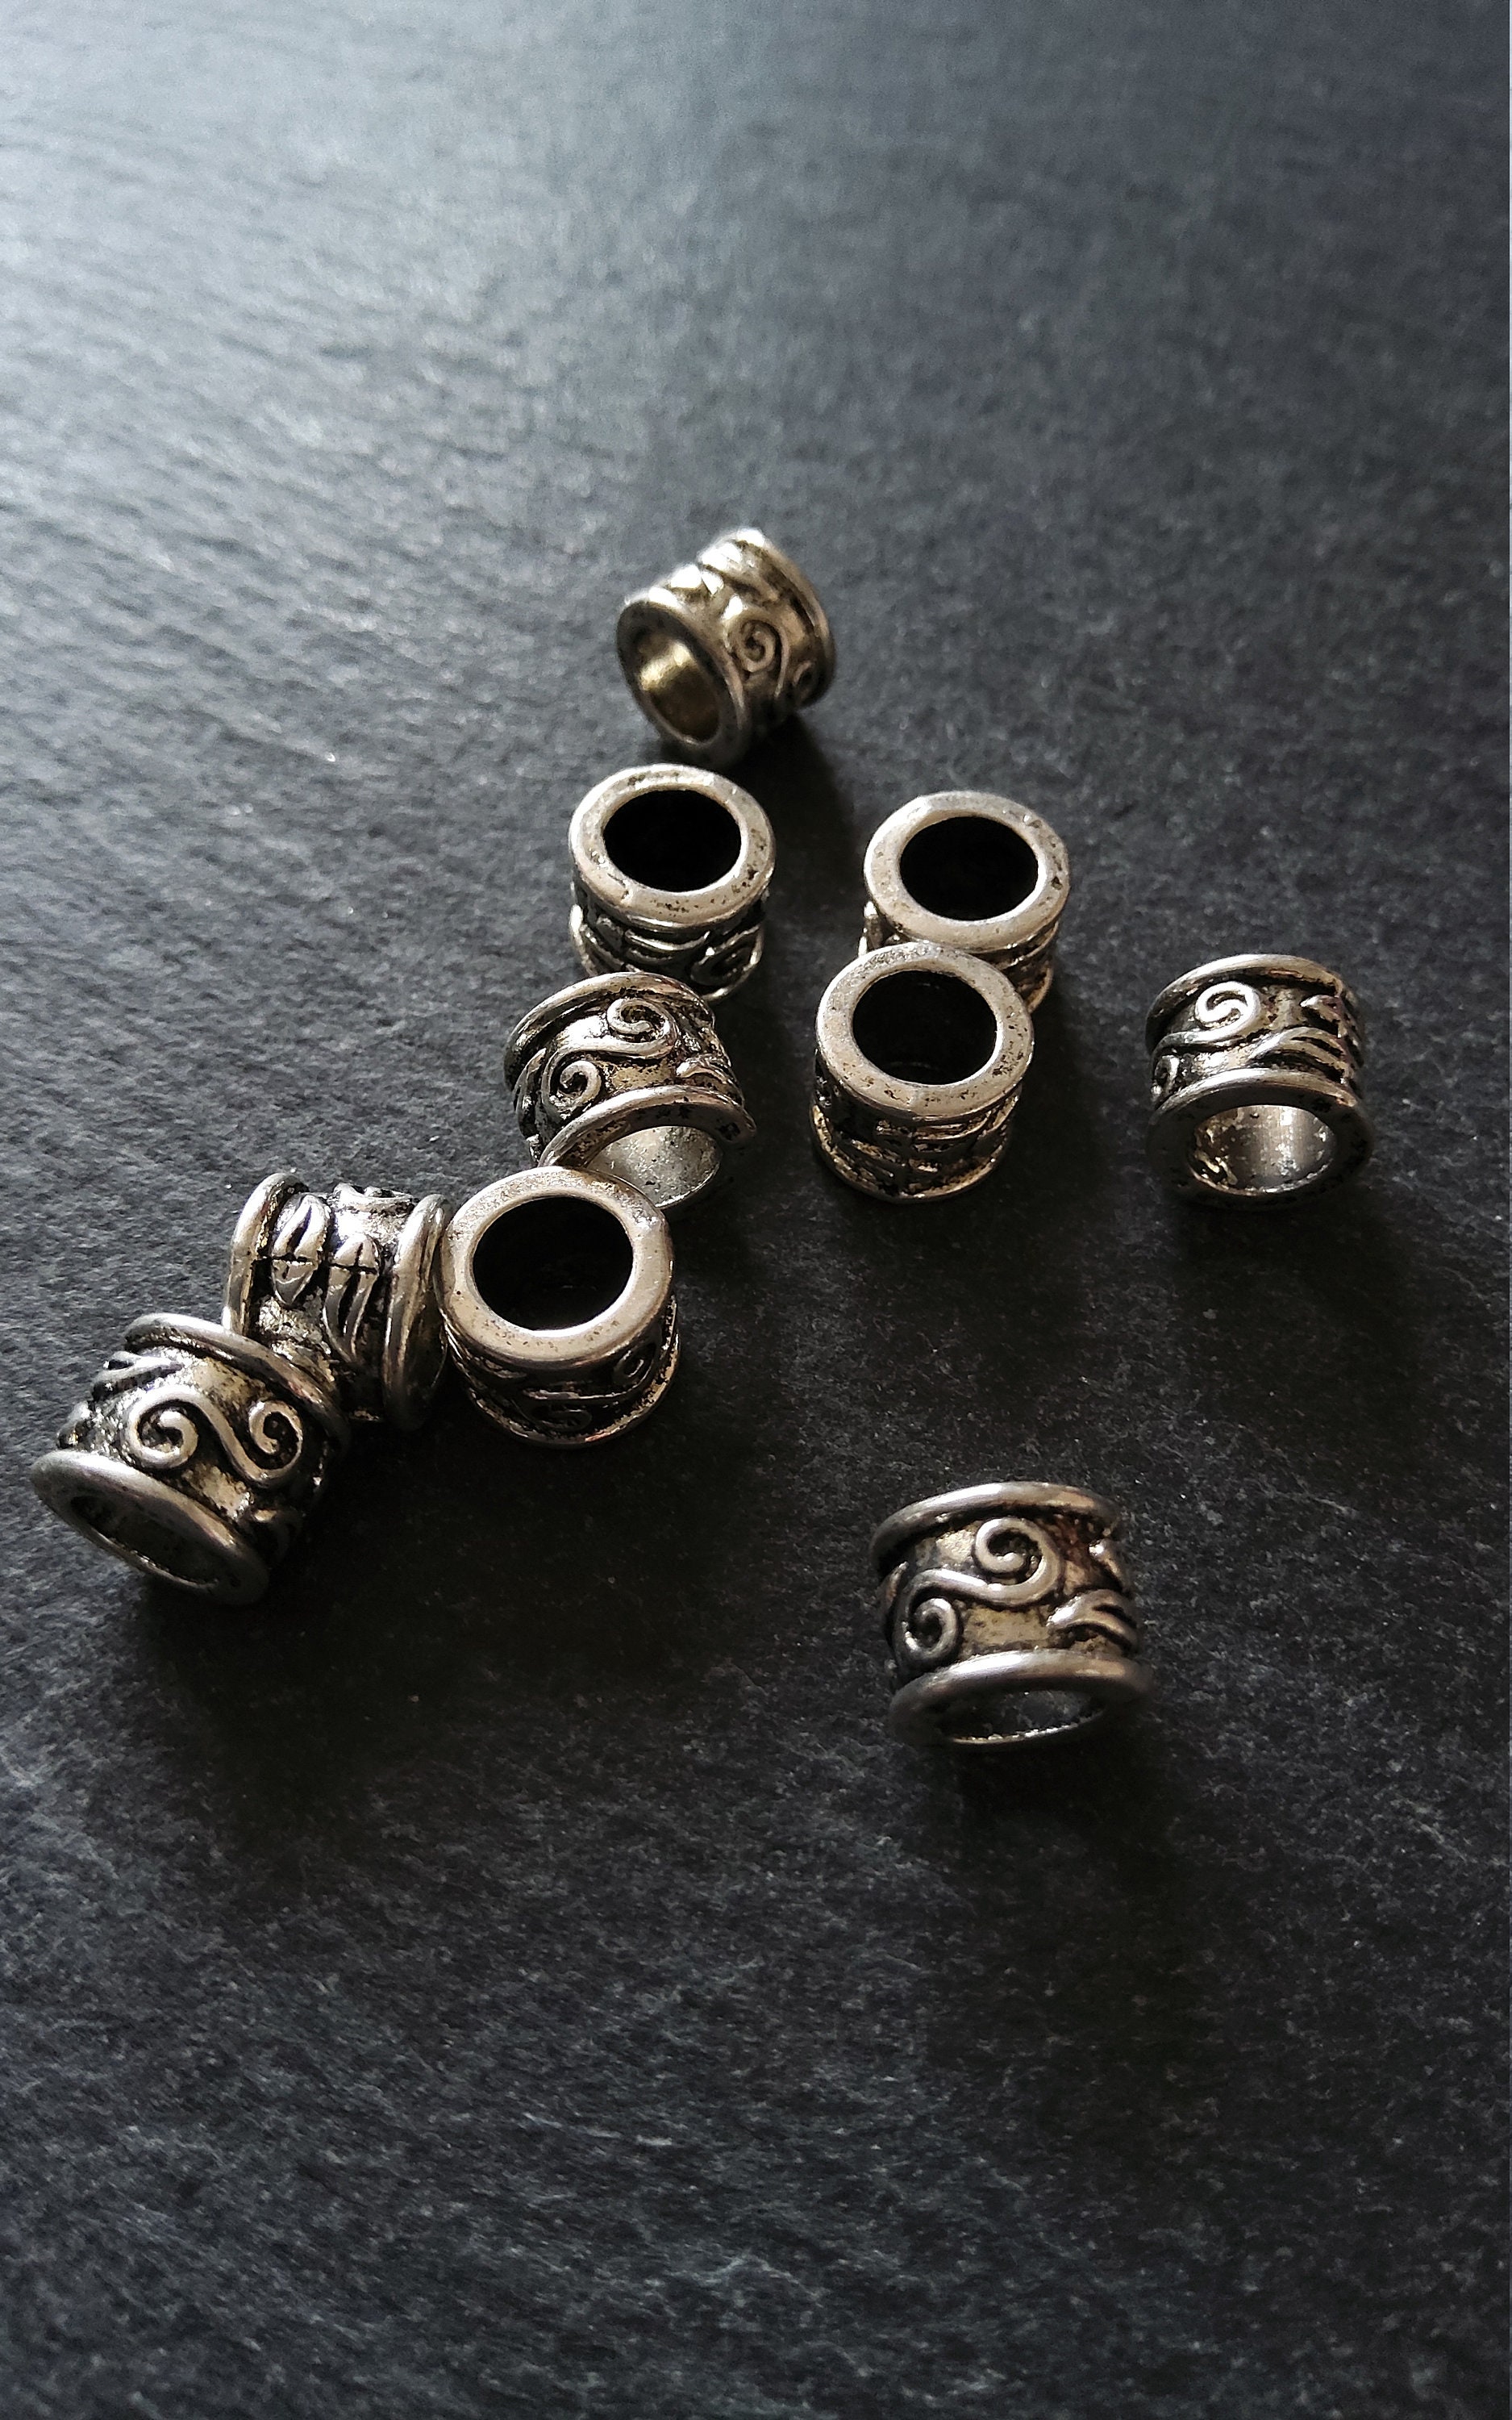 300 Tibetan Silver Cylindrical Spacer Bead Stopper For Jewelry